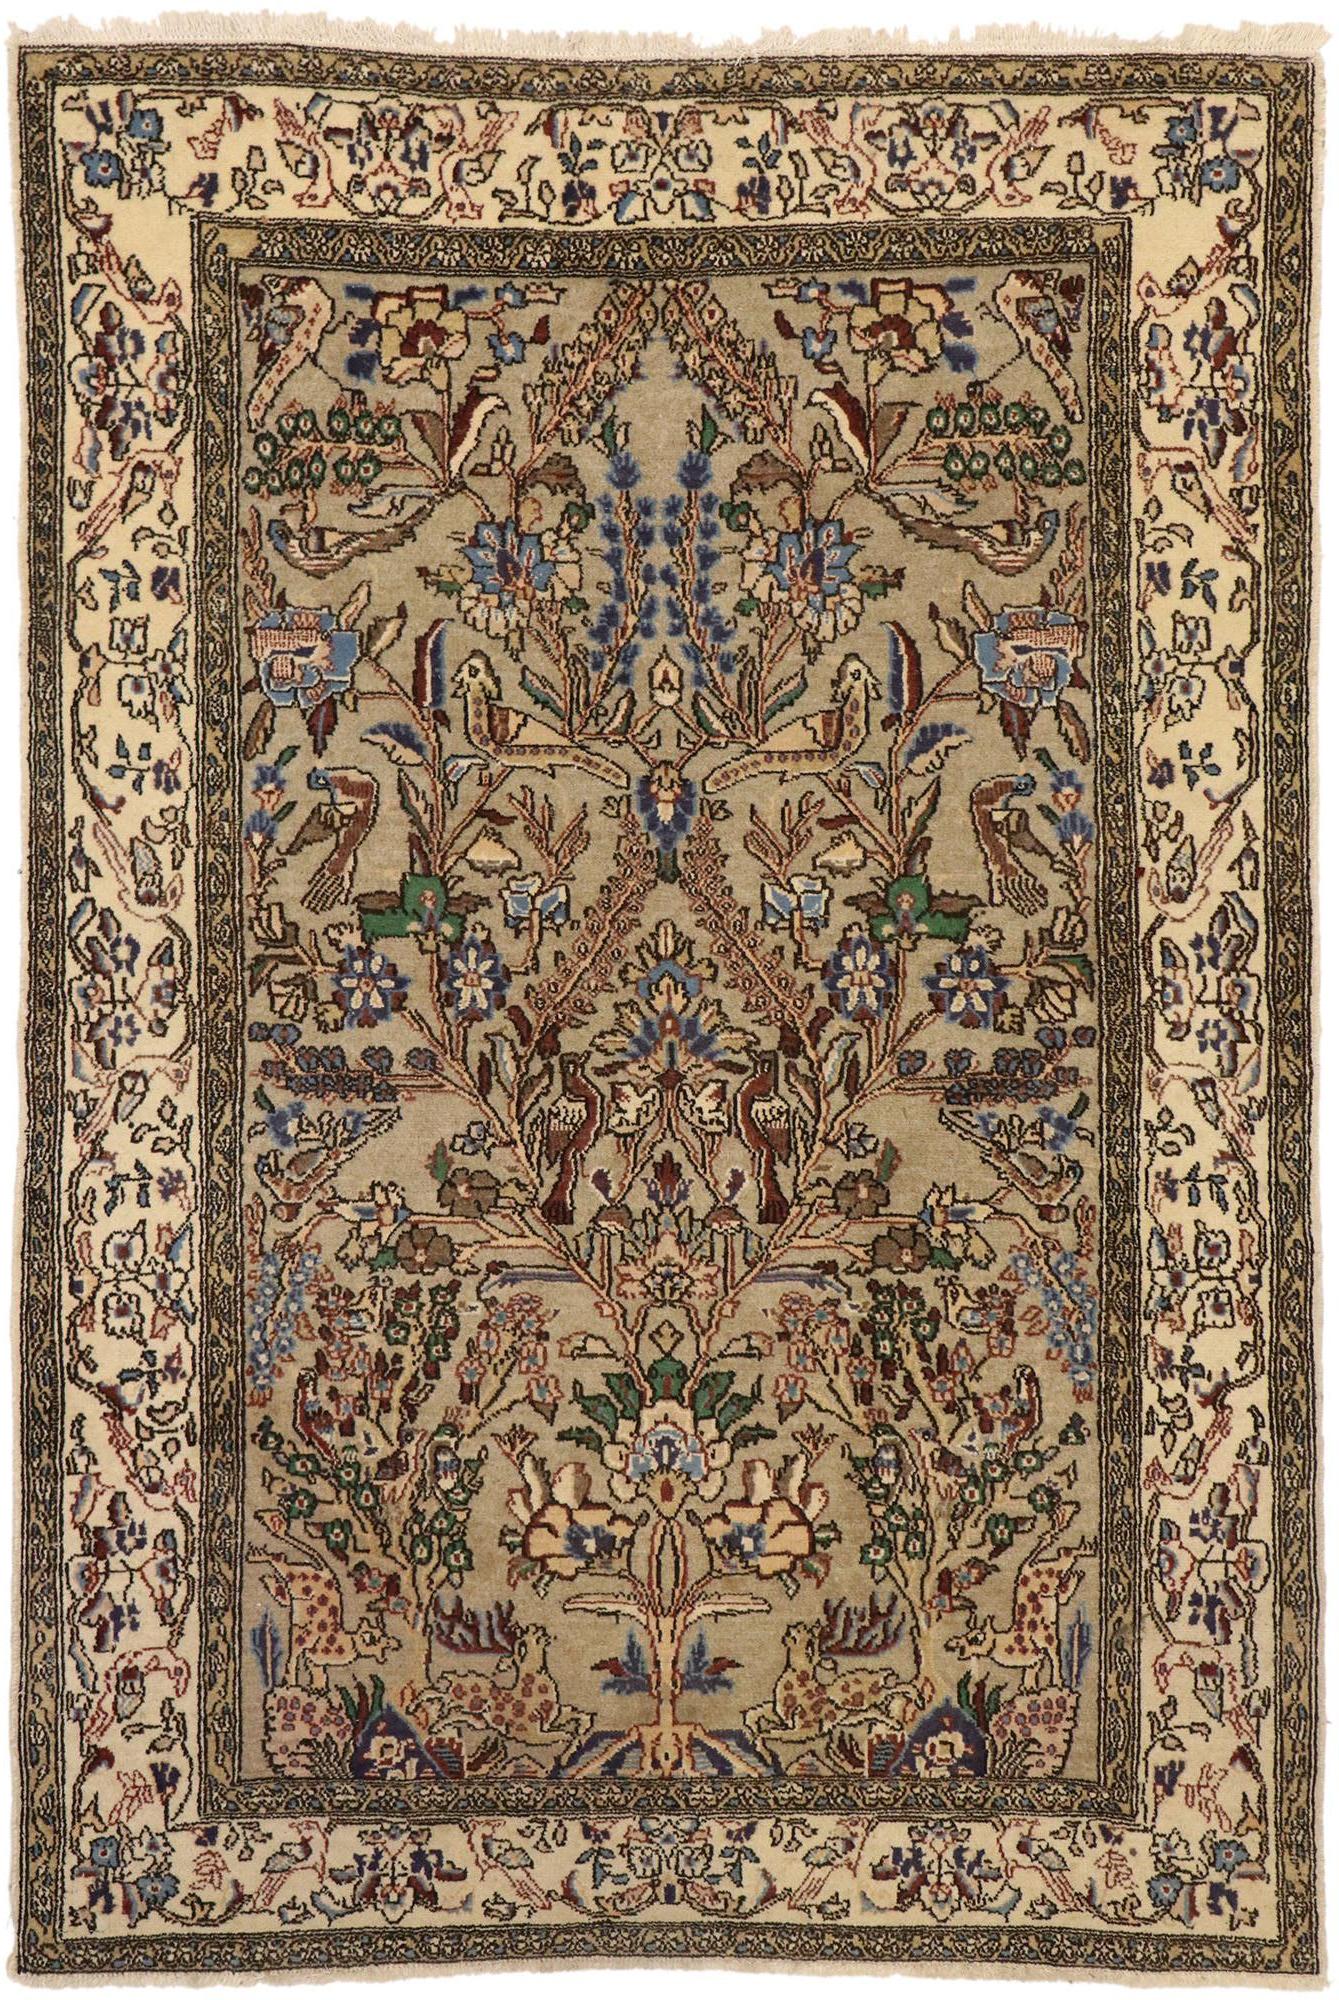 ​76430 Vintage Persian Qum Pictorial Tree of Life Area Rug with Arts and Crafts Style 03'05 x 05'00. The architectural elements of naturalistic forms combined with Arts & Crafts style, this hand knotted wool vintage Persian Qum pictorial rug